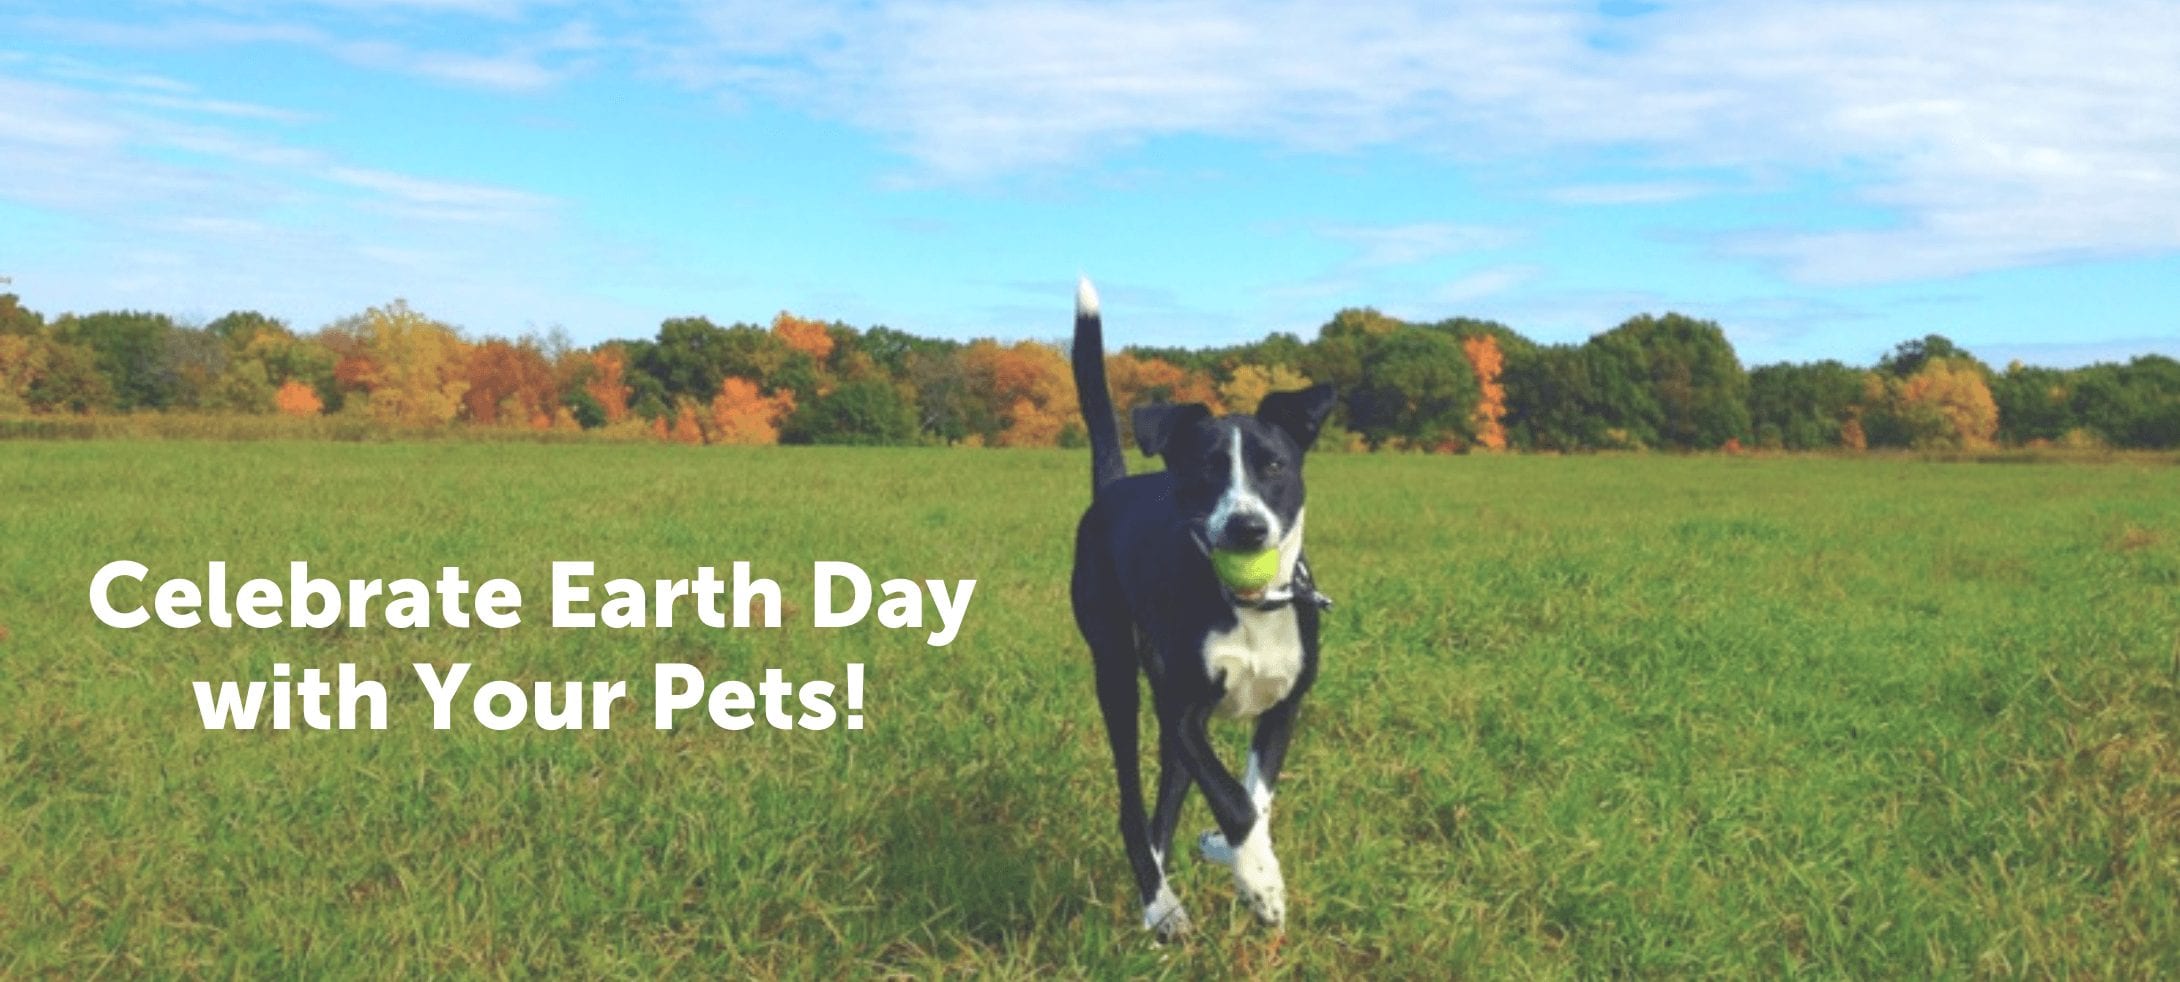 Celebrate Earth Day with Your Pets